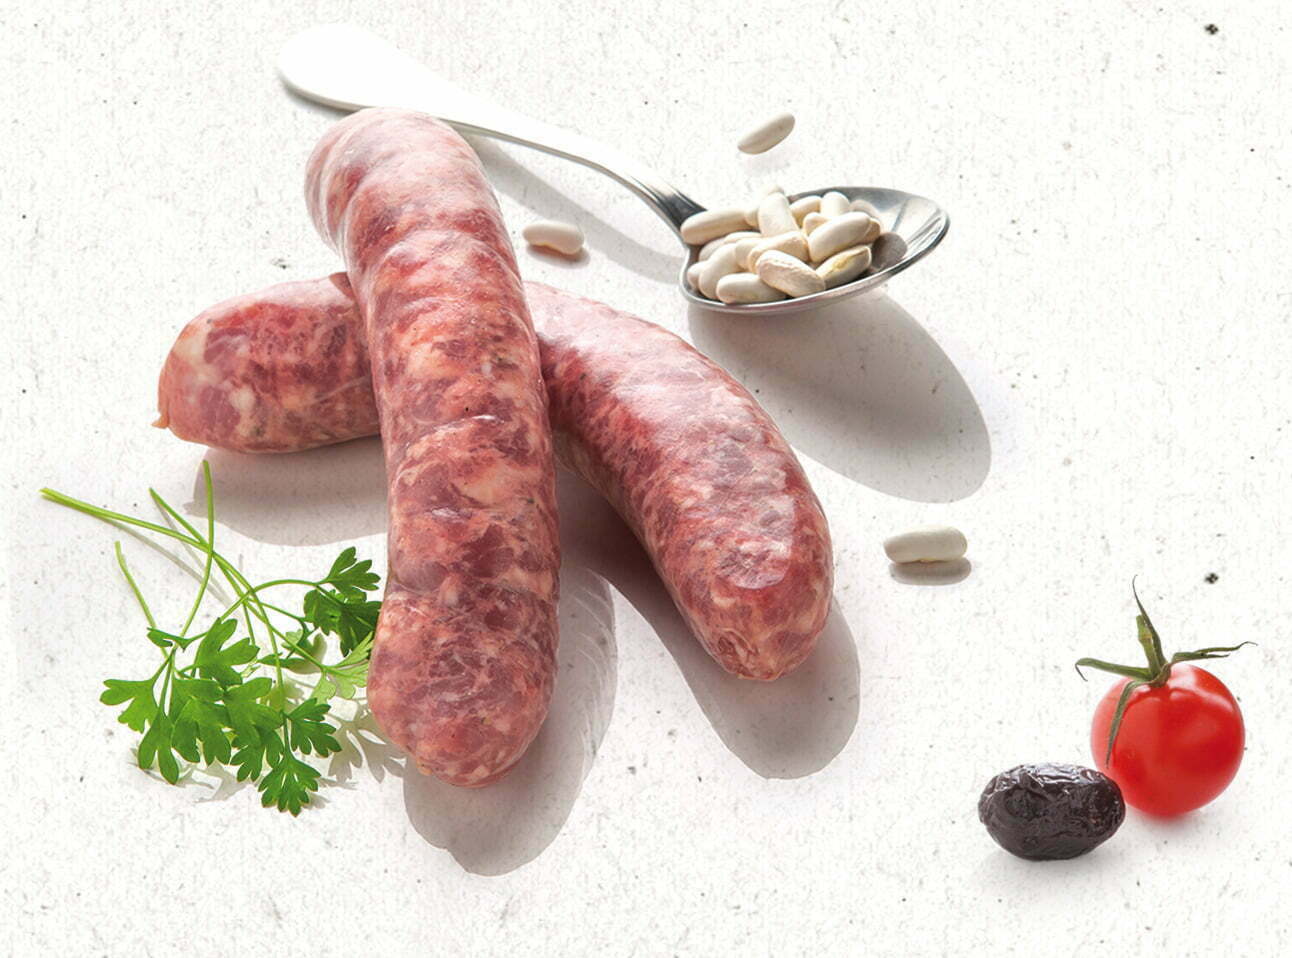 saucisses-gras_cap-solutions-culinaires_herbes-tomate-olive-haricots_